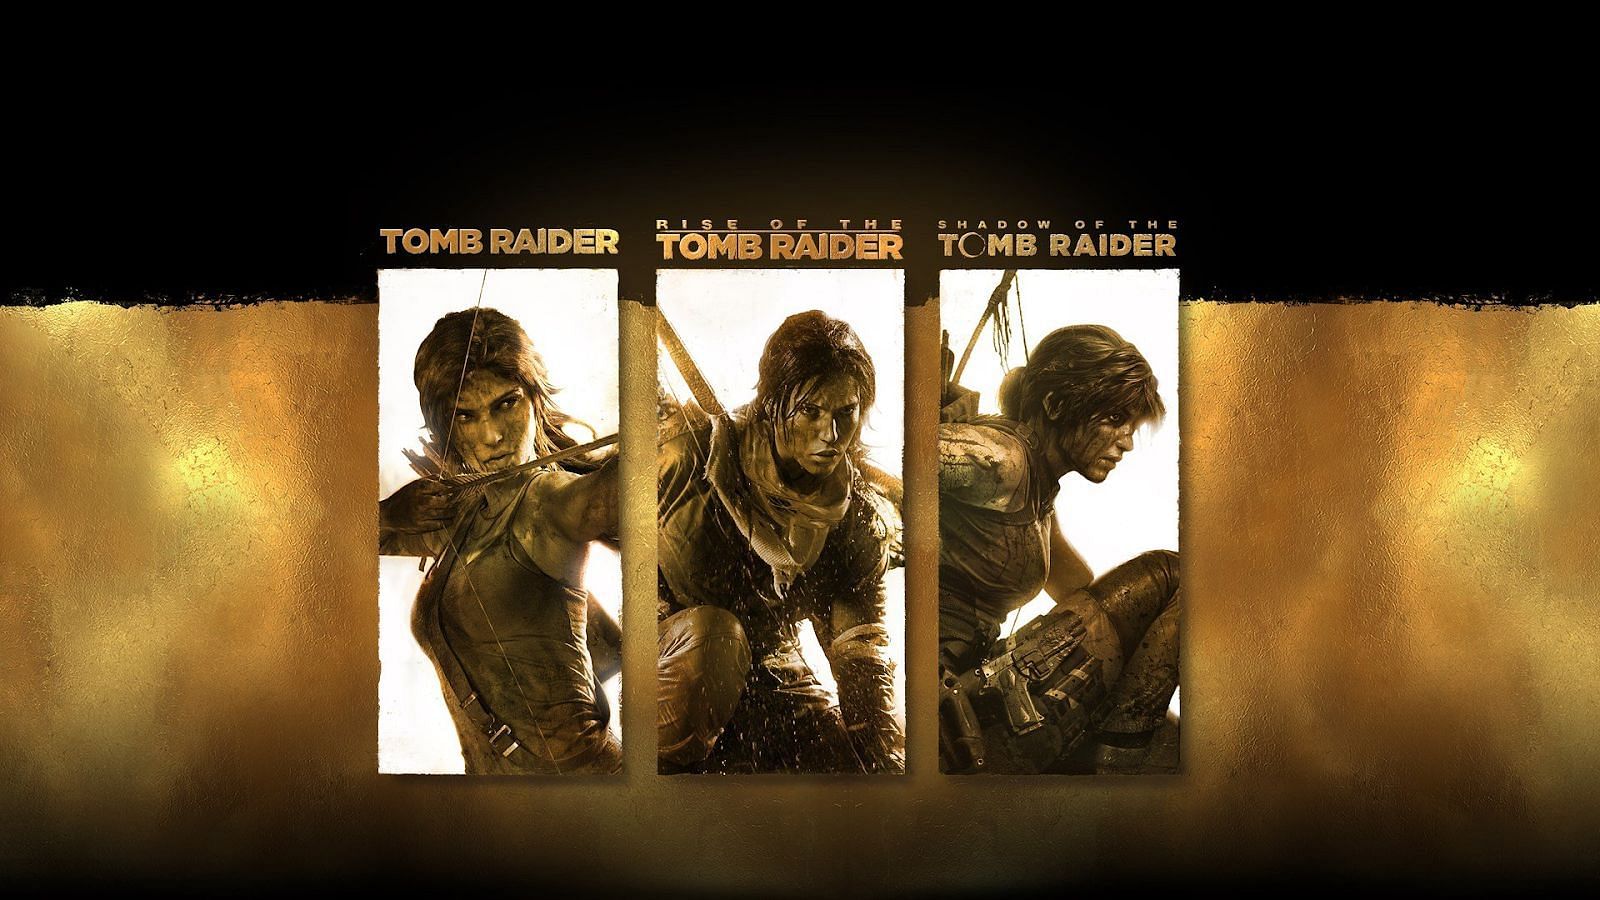 Epic Games Store might be giving away Tomb Raider: Definitive Survivor Trilogy for free (Image by Square Enix)